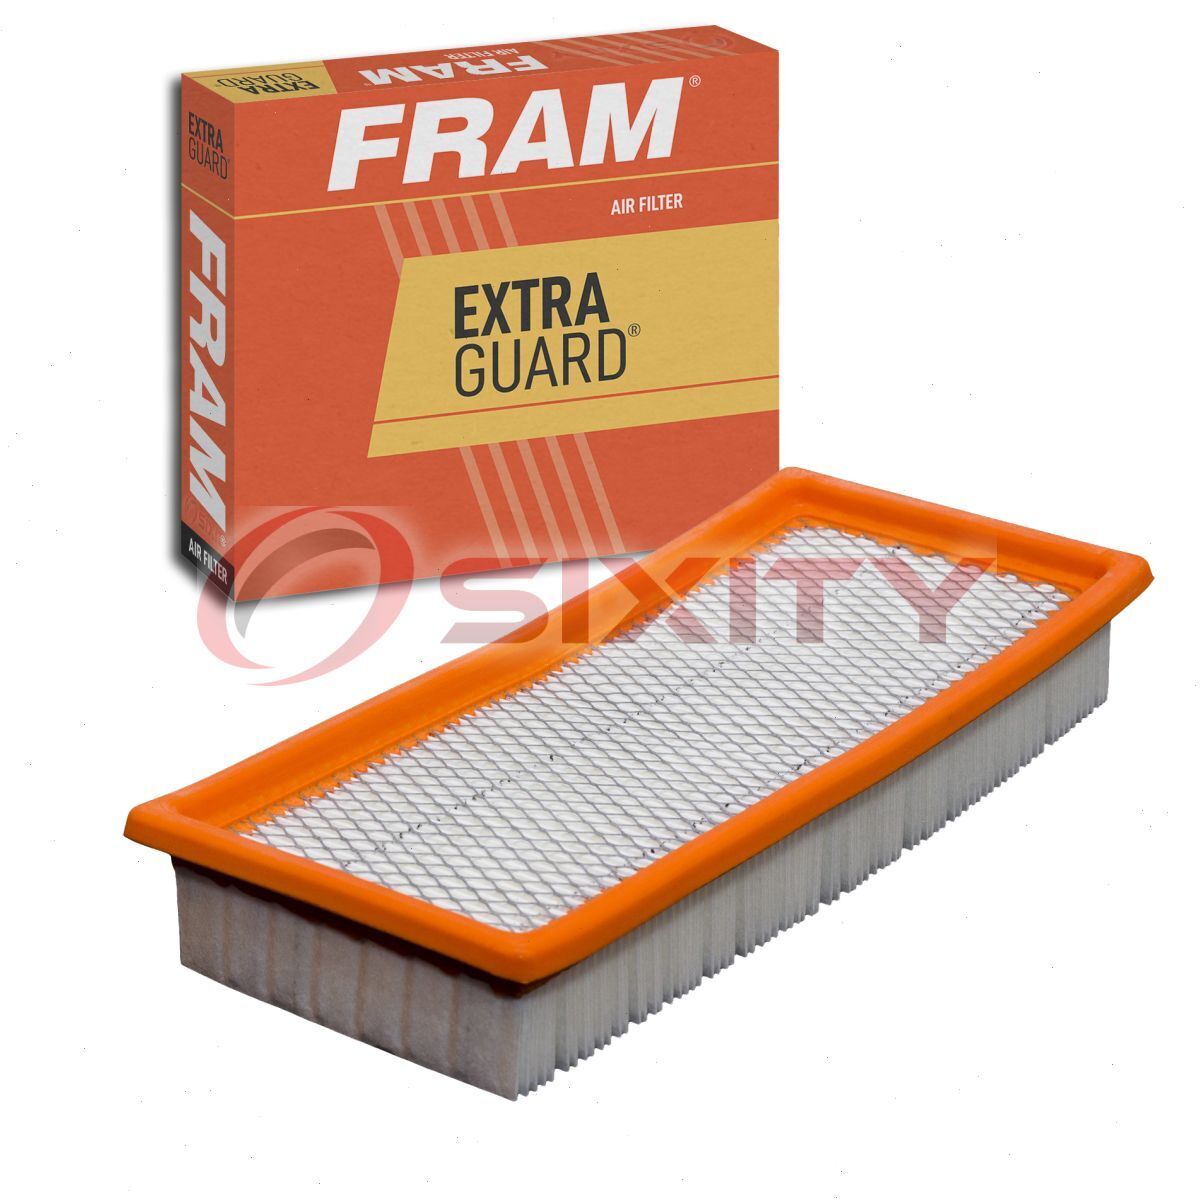 FRAM Extra Guard Air Filter for 2005-2007 Mercury Montego Intake Inlet wk